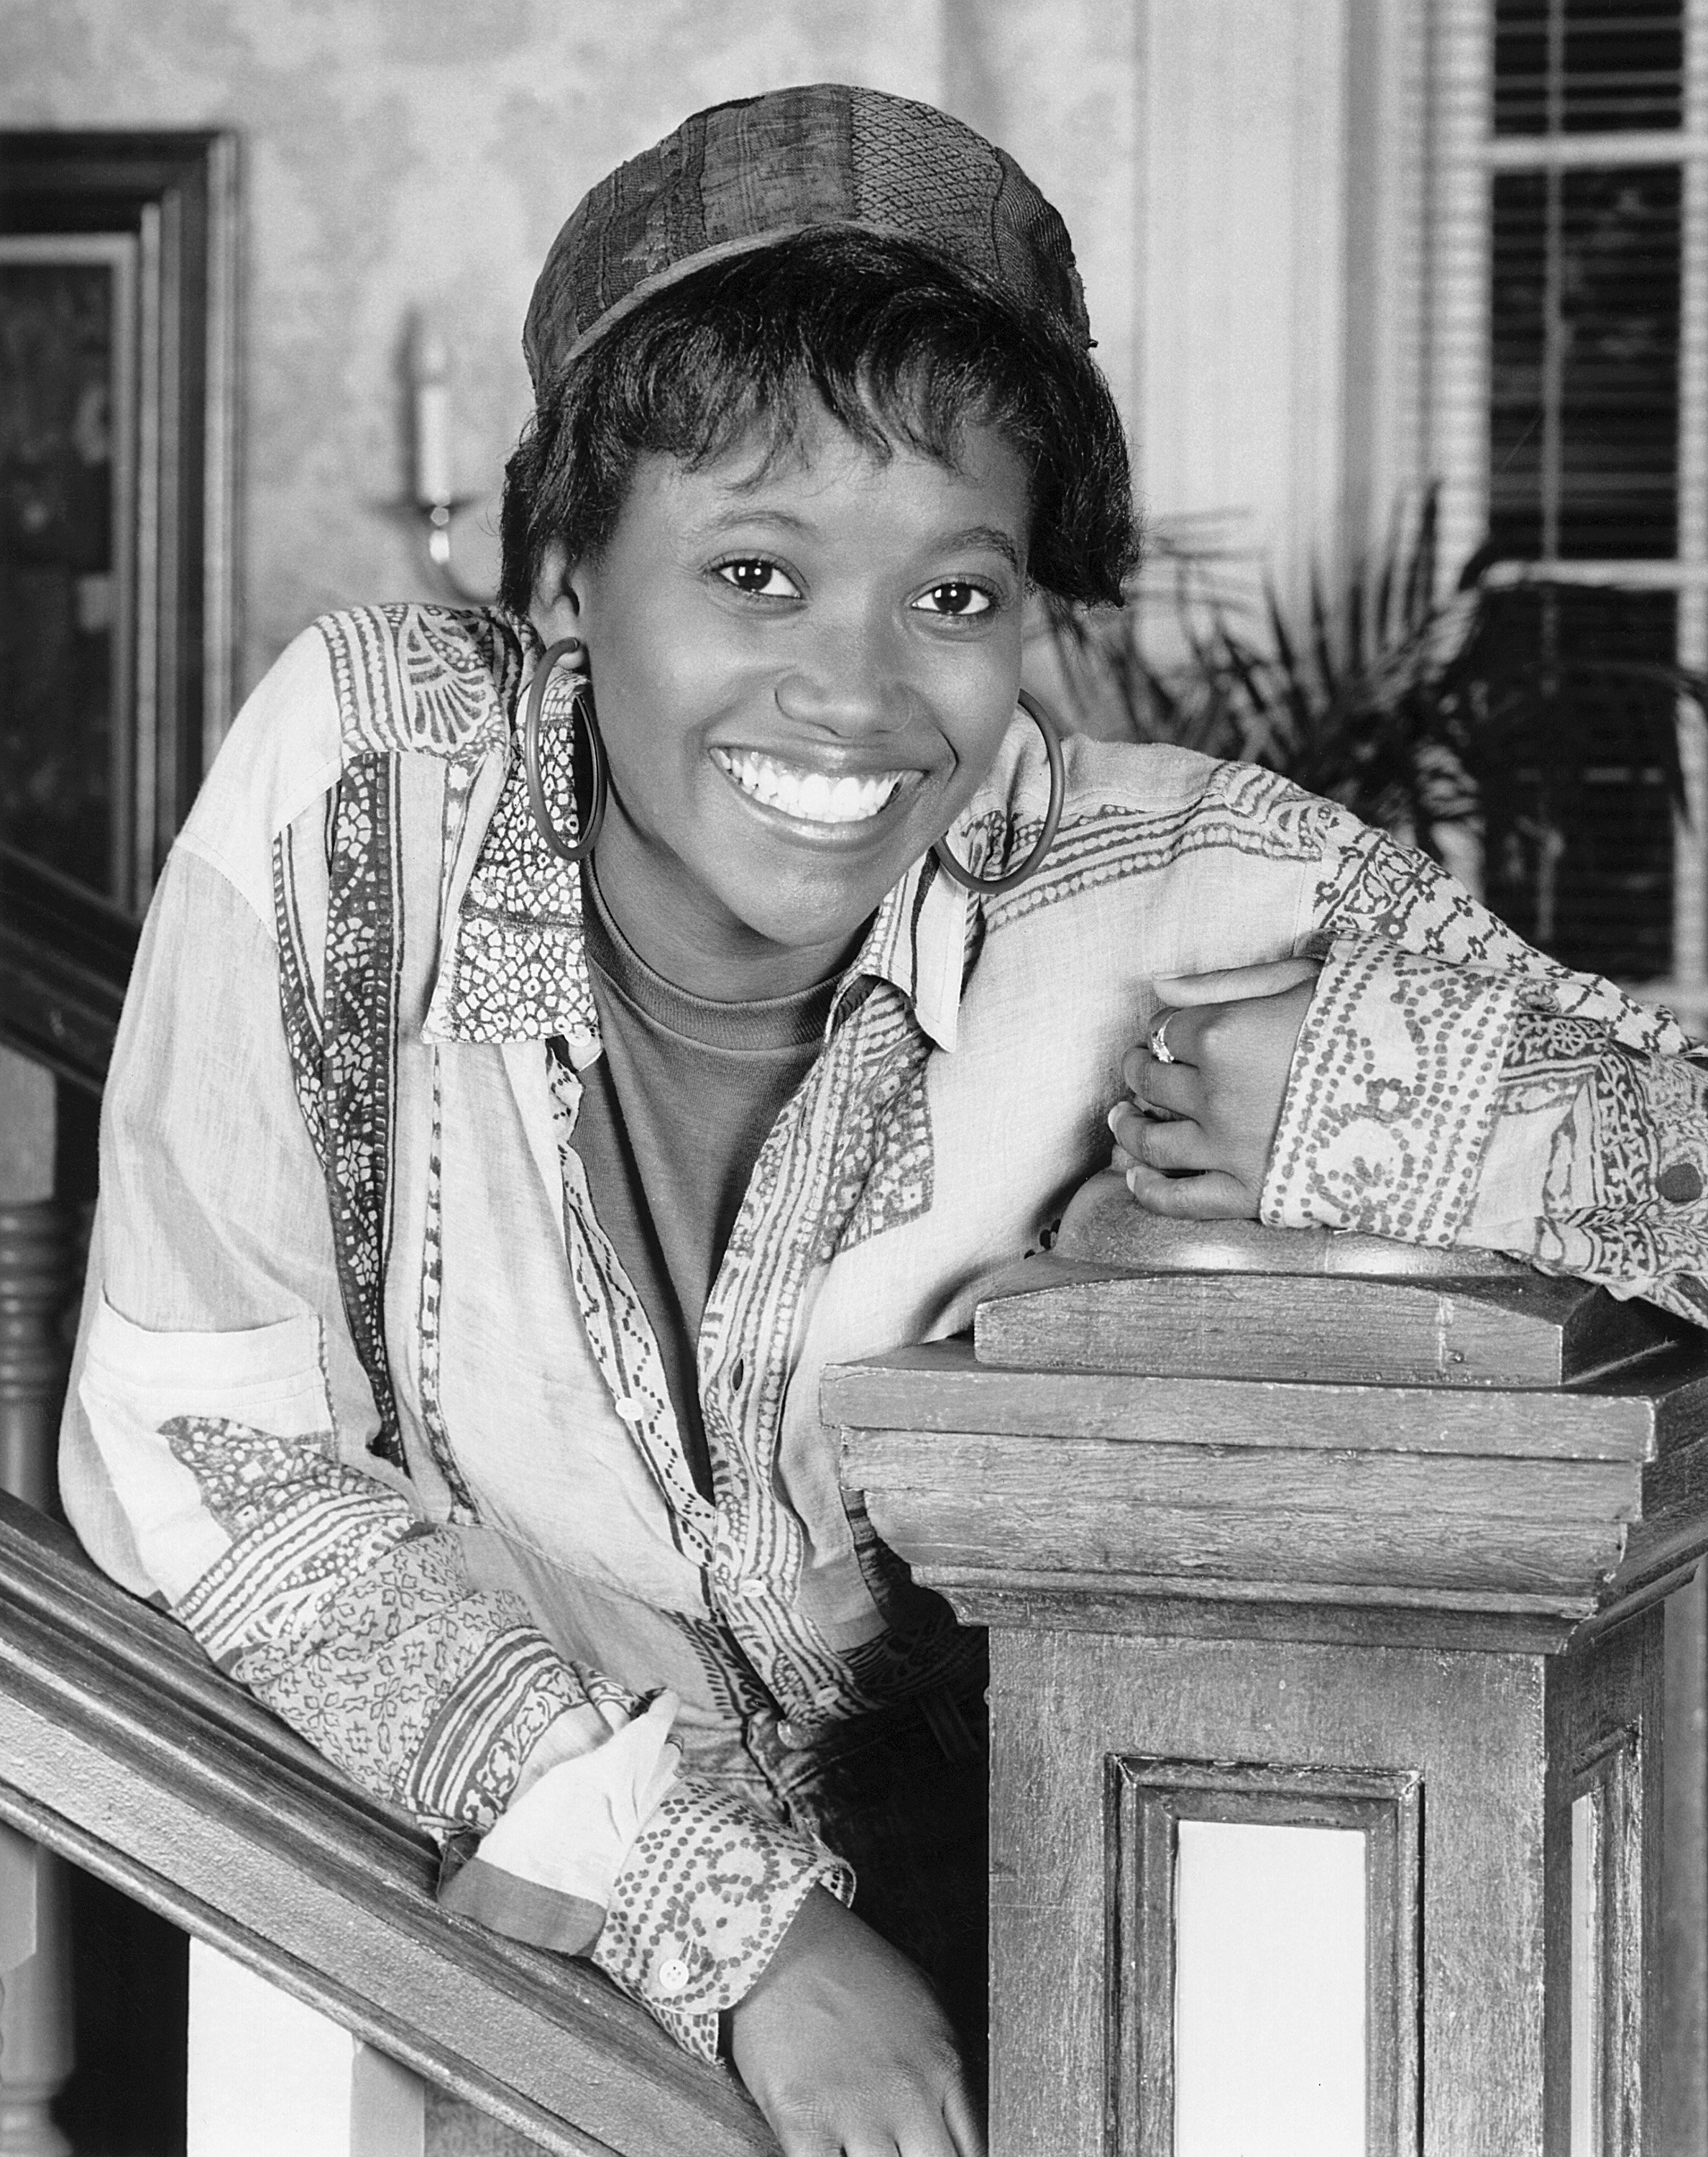 Erika Alexander as Pam Tucker on "The Cosby Show" | Photo: GettyImages